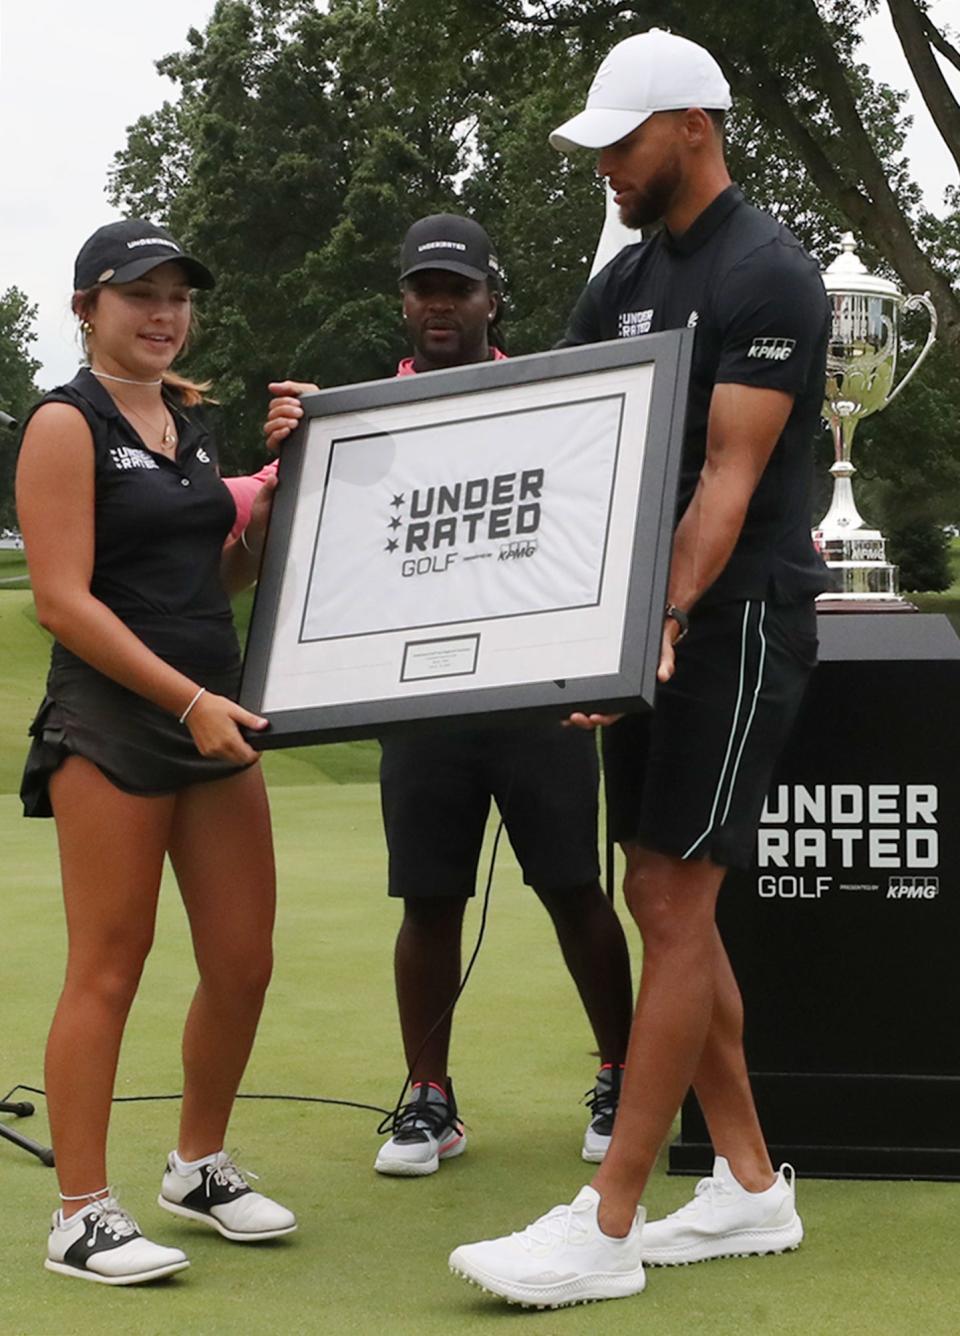 Julia Vollmer, top female on the Akron stop of Underrated Golf tour, takes the framed flag from Stephen Curry on 18th green of the South Course at Firestone Country Club in Akron.